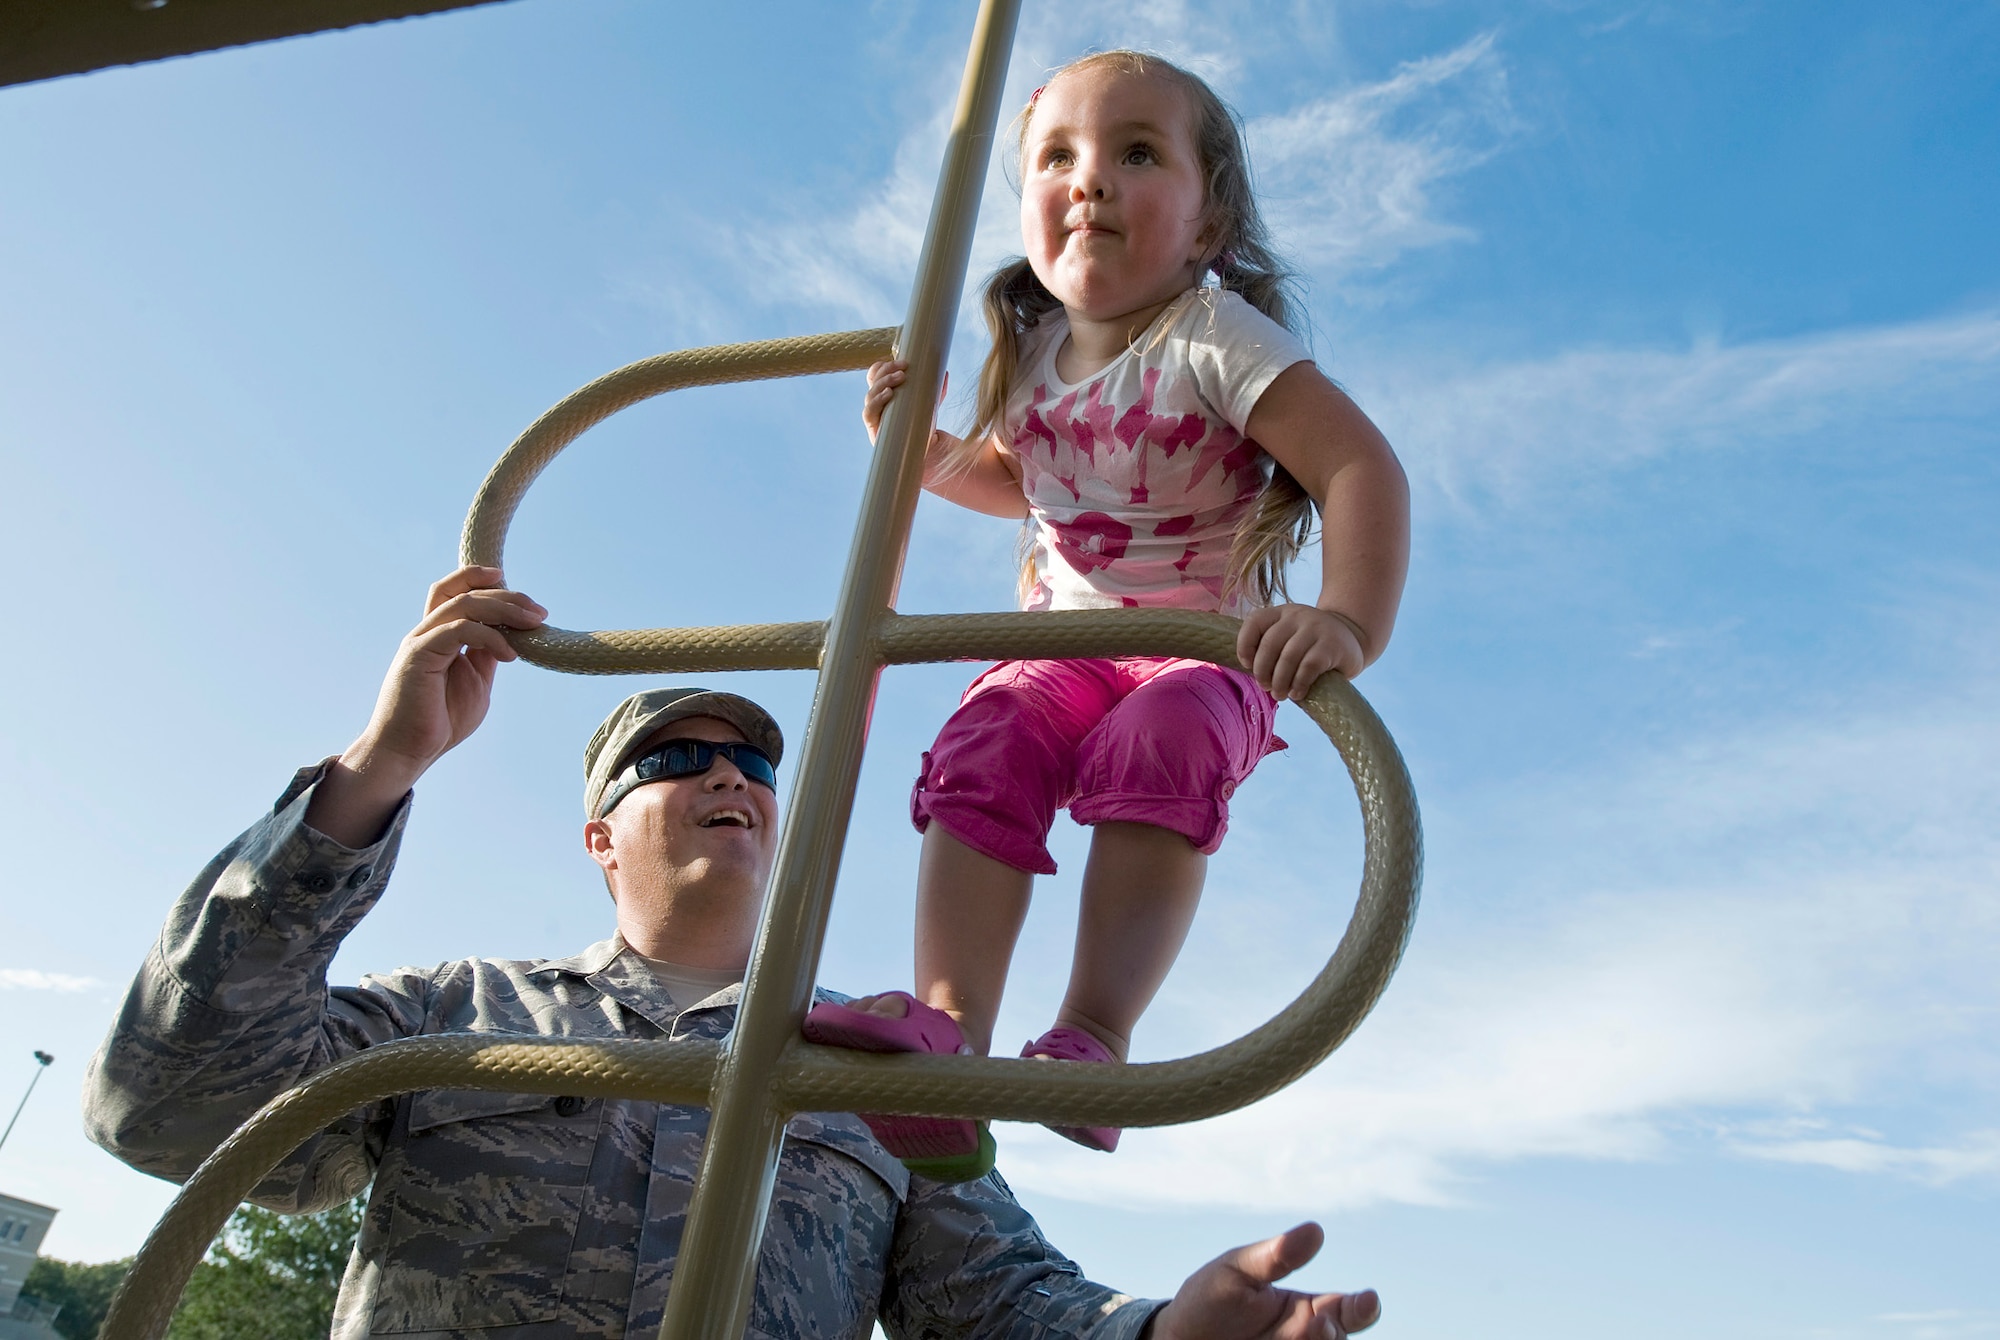 Master Sgt. Rodolfo Gamez watches over his daughter, Eva, while she climbs on a jungle gym at their neighborhood park. The Gamezes are set to deploy to separate locations later this year for year-long deployments. (U.S. Air Force photo/Staff Sgt. Bennie J. Davis III)